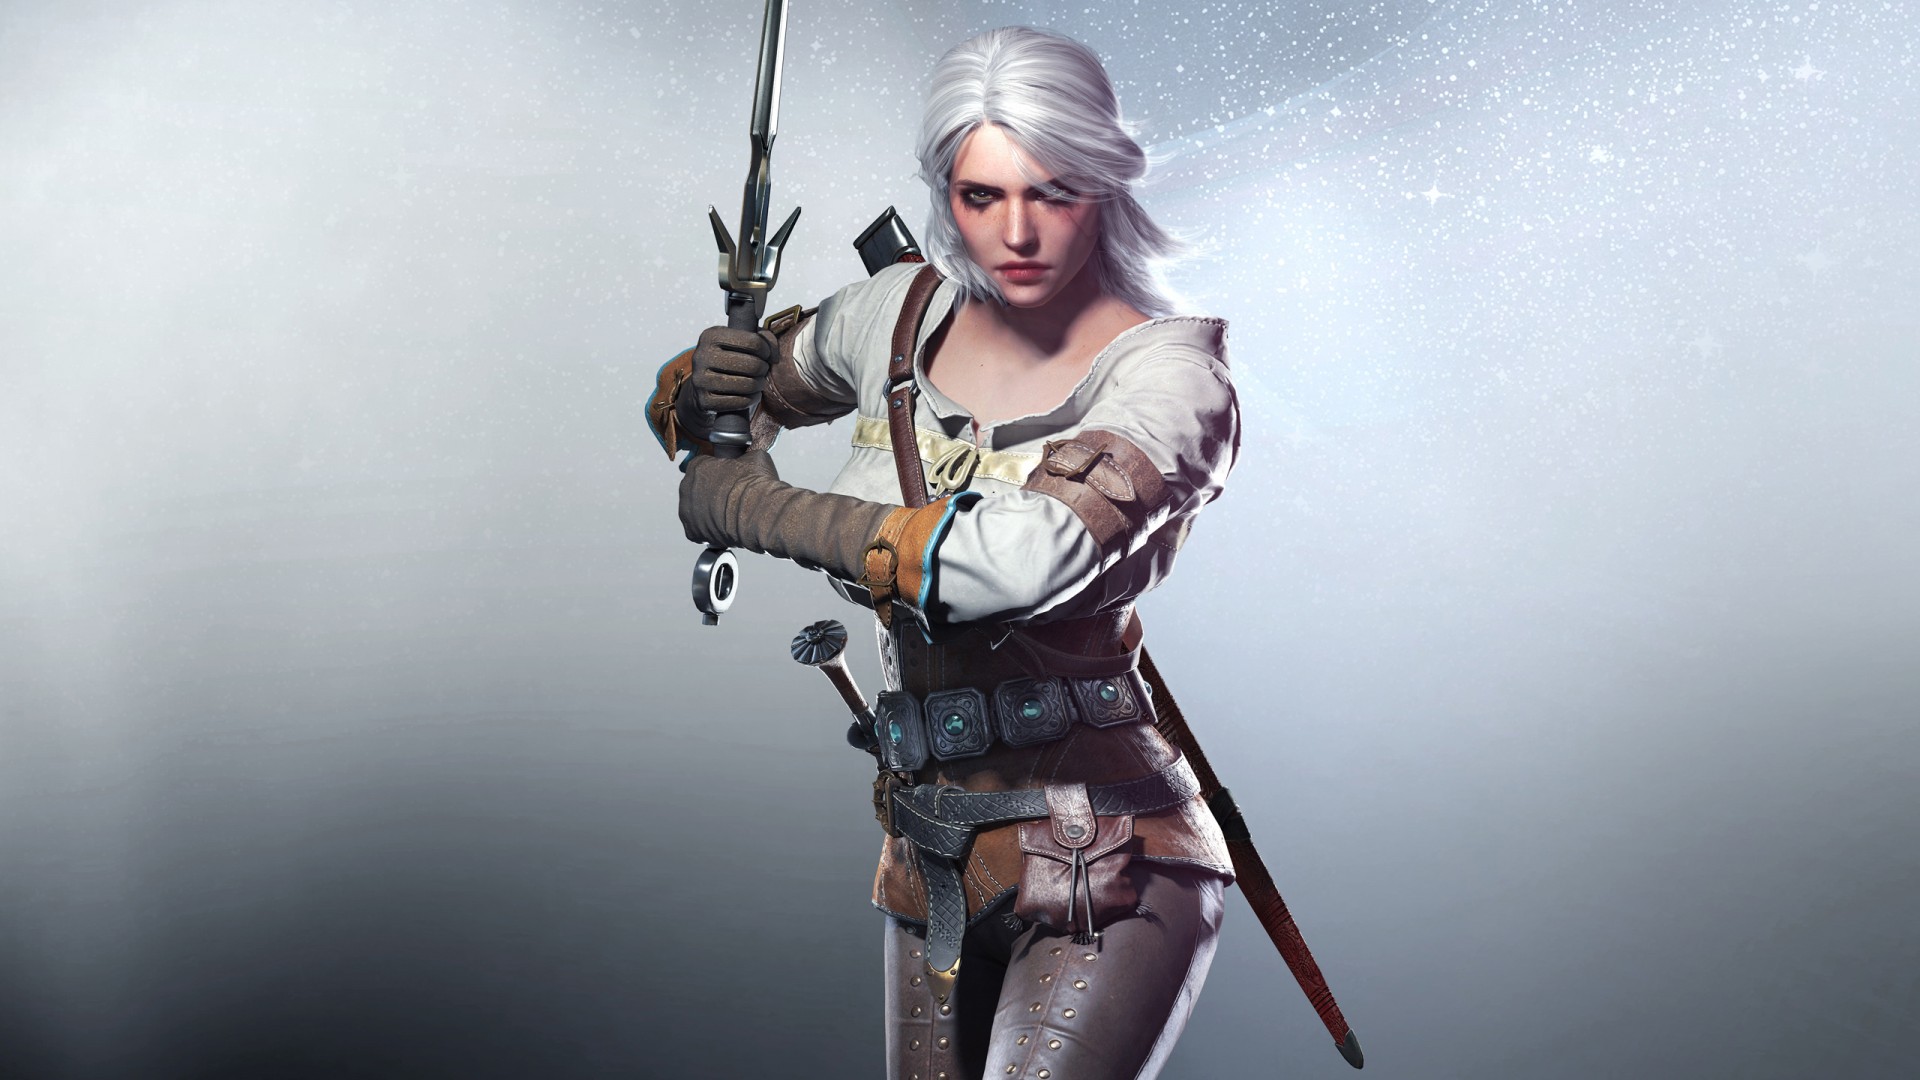 ciri wallpaper,cg artwork,fictional character,archery,massively multiplayer online role playing game,action figure